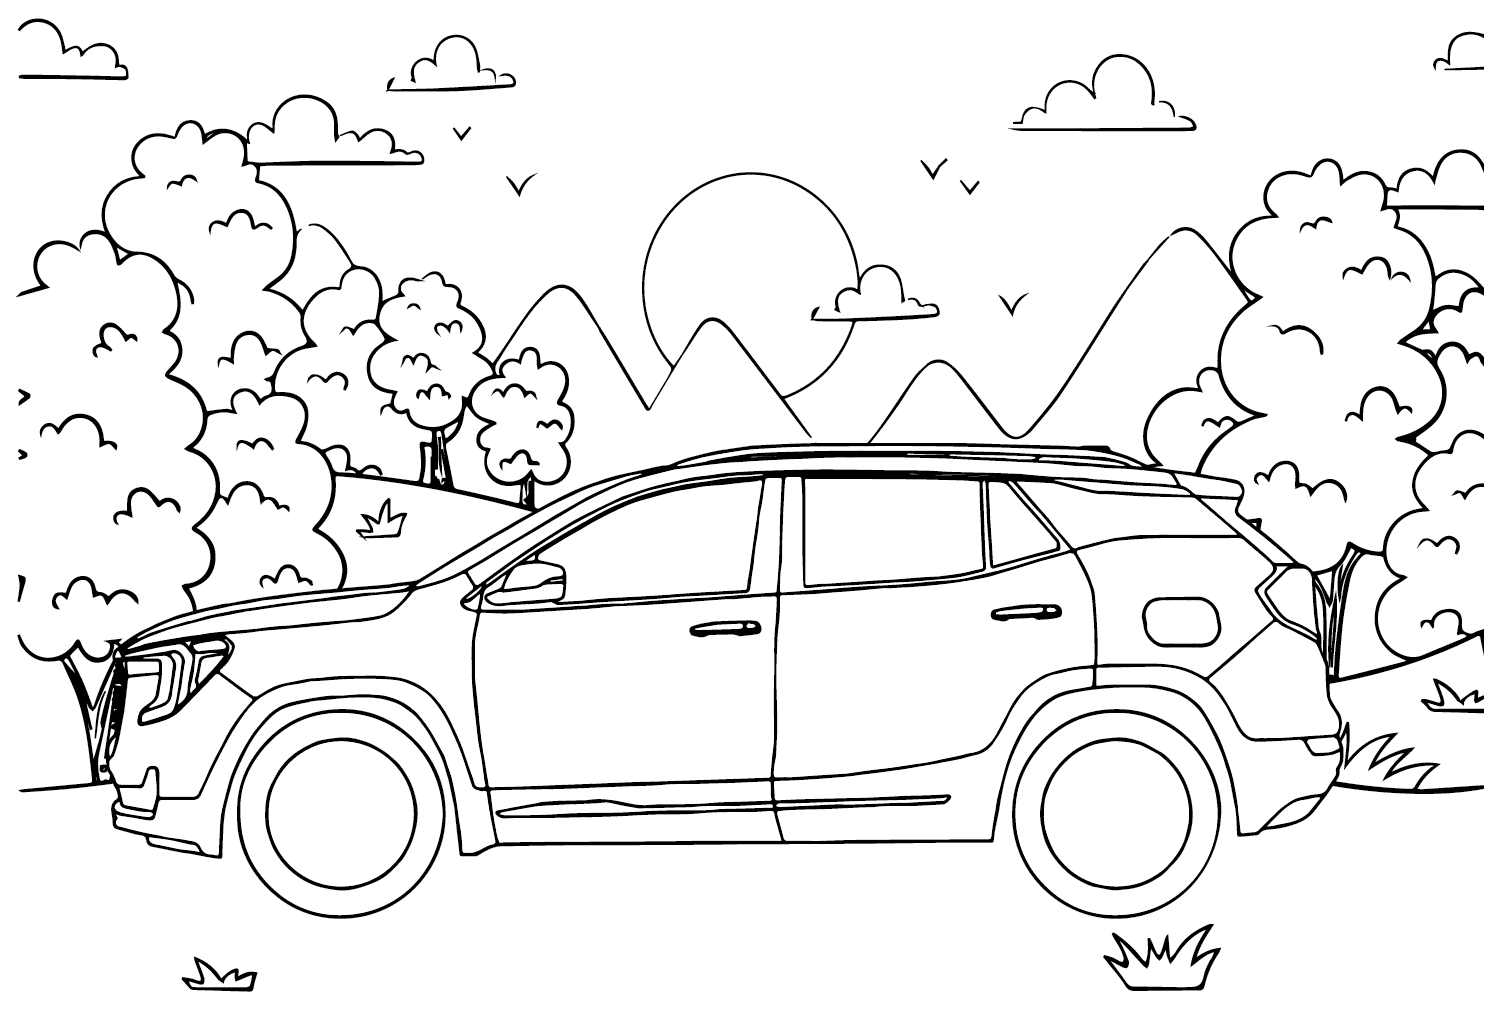 GMC Sierra HD Trucks Coloring Page - Free Printable Coloring Pages